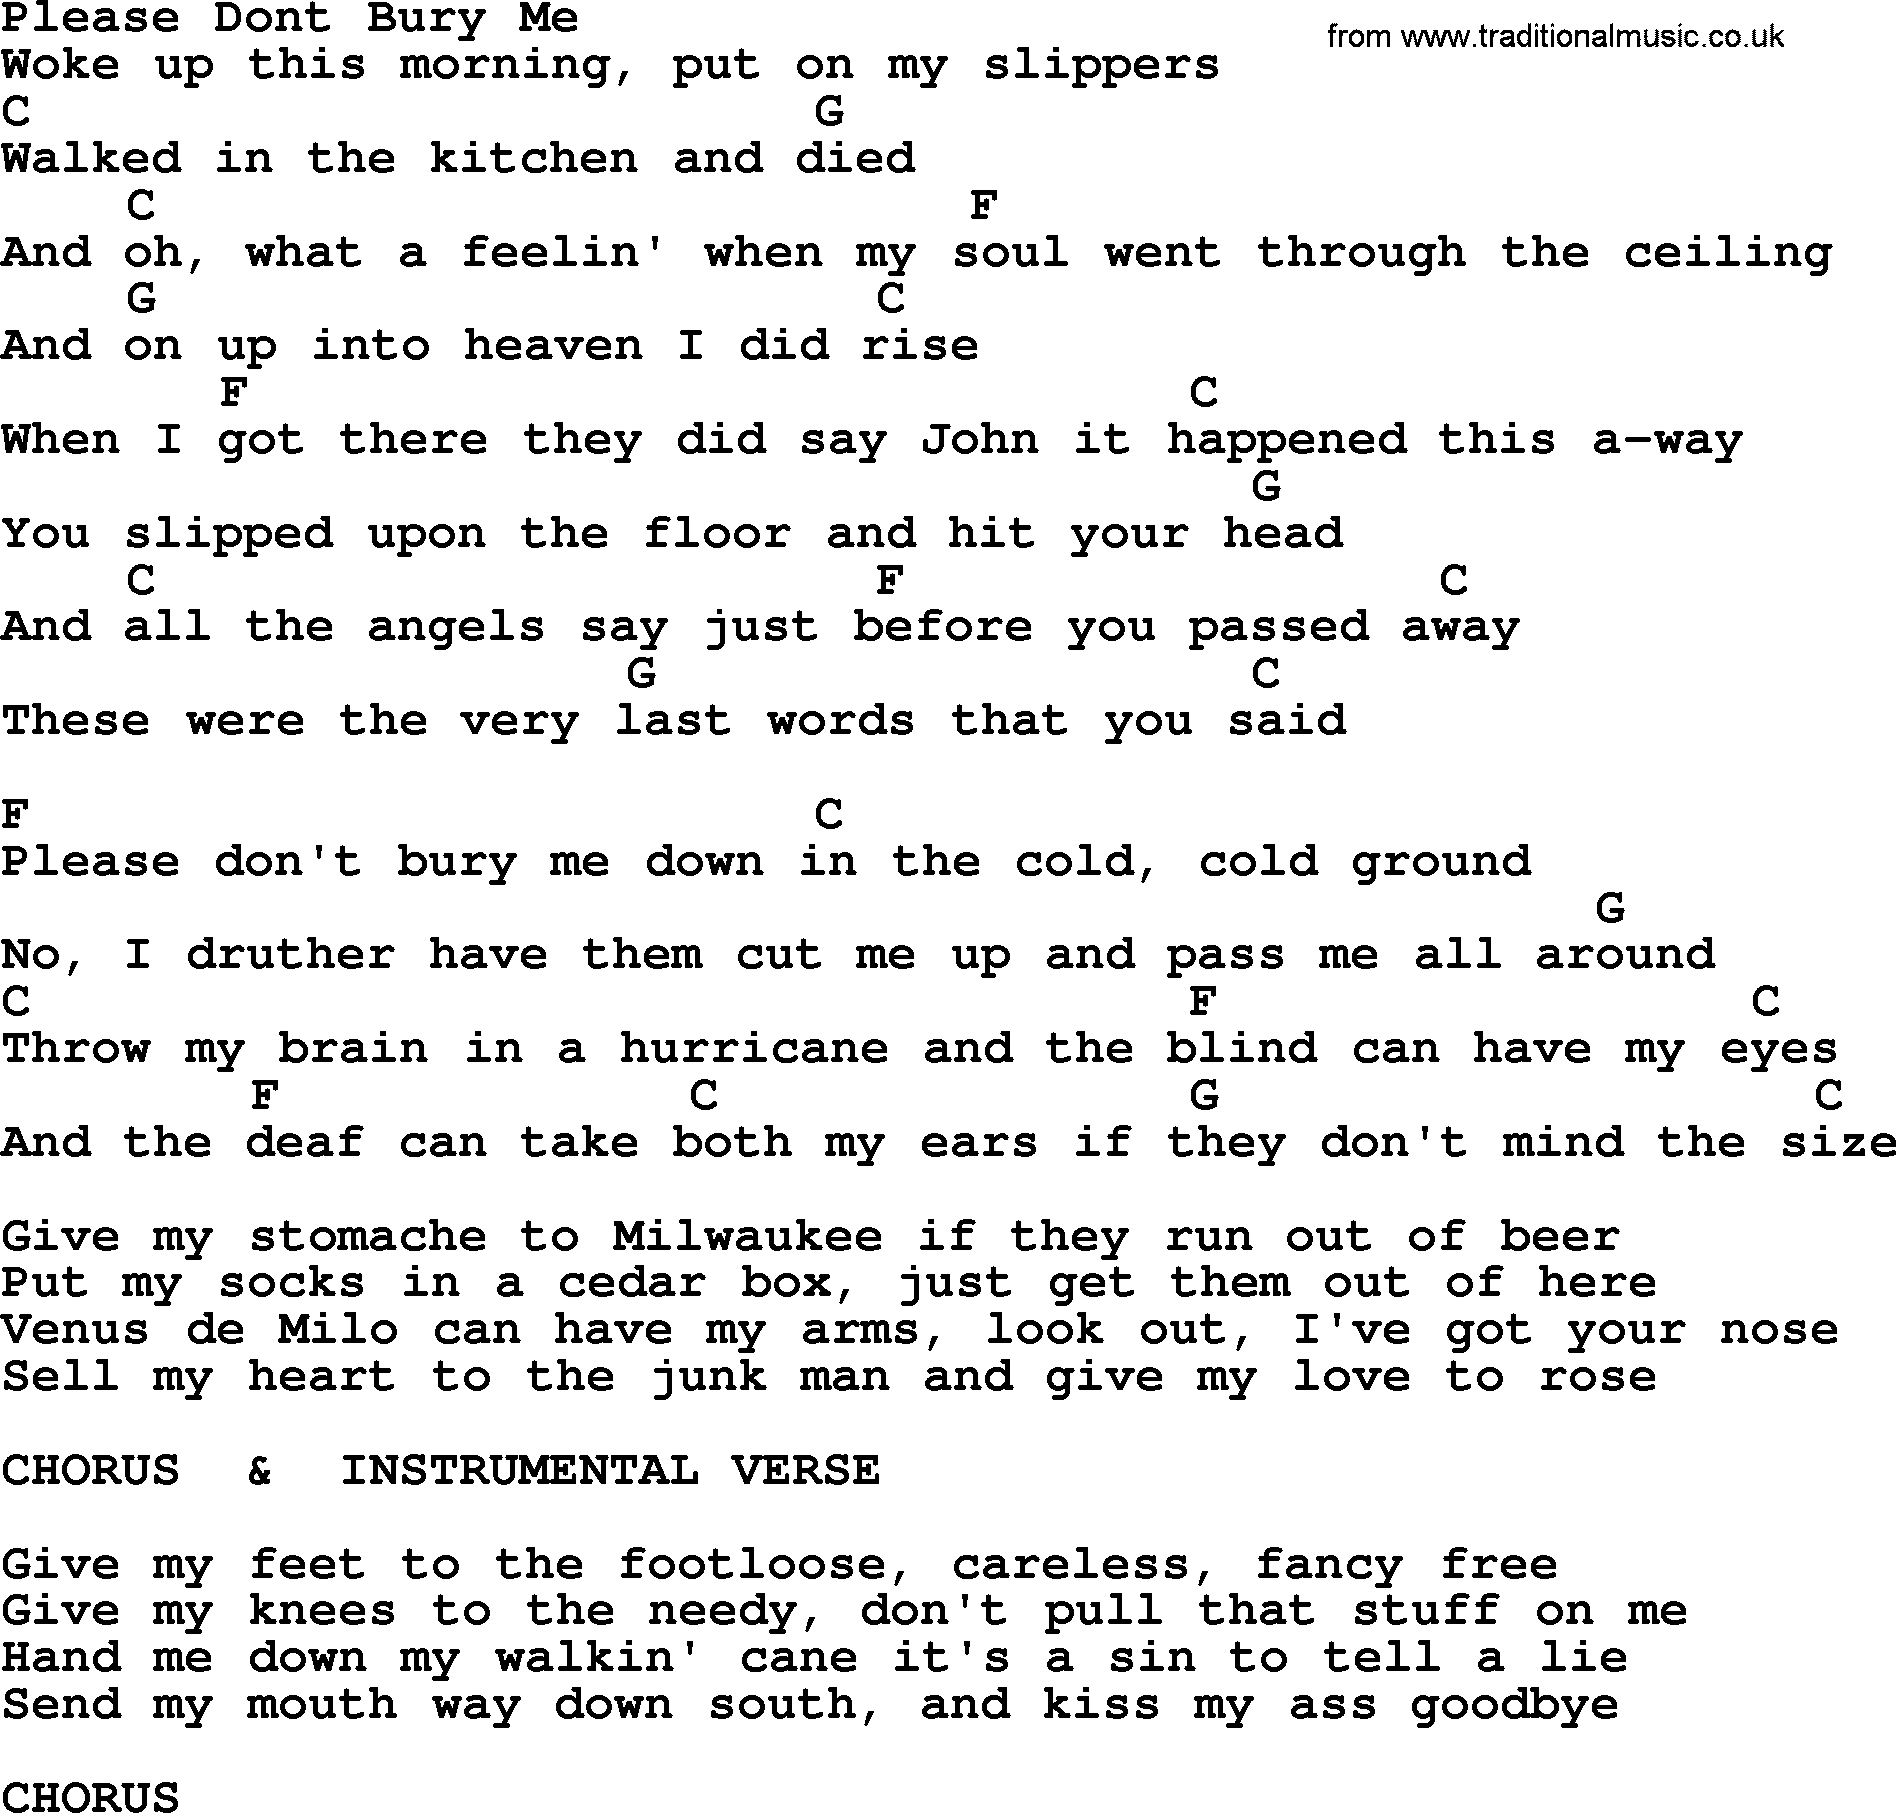 Bluegrass song: Please Dont Bury Me, lyrics and chords